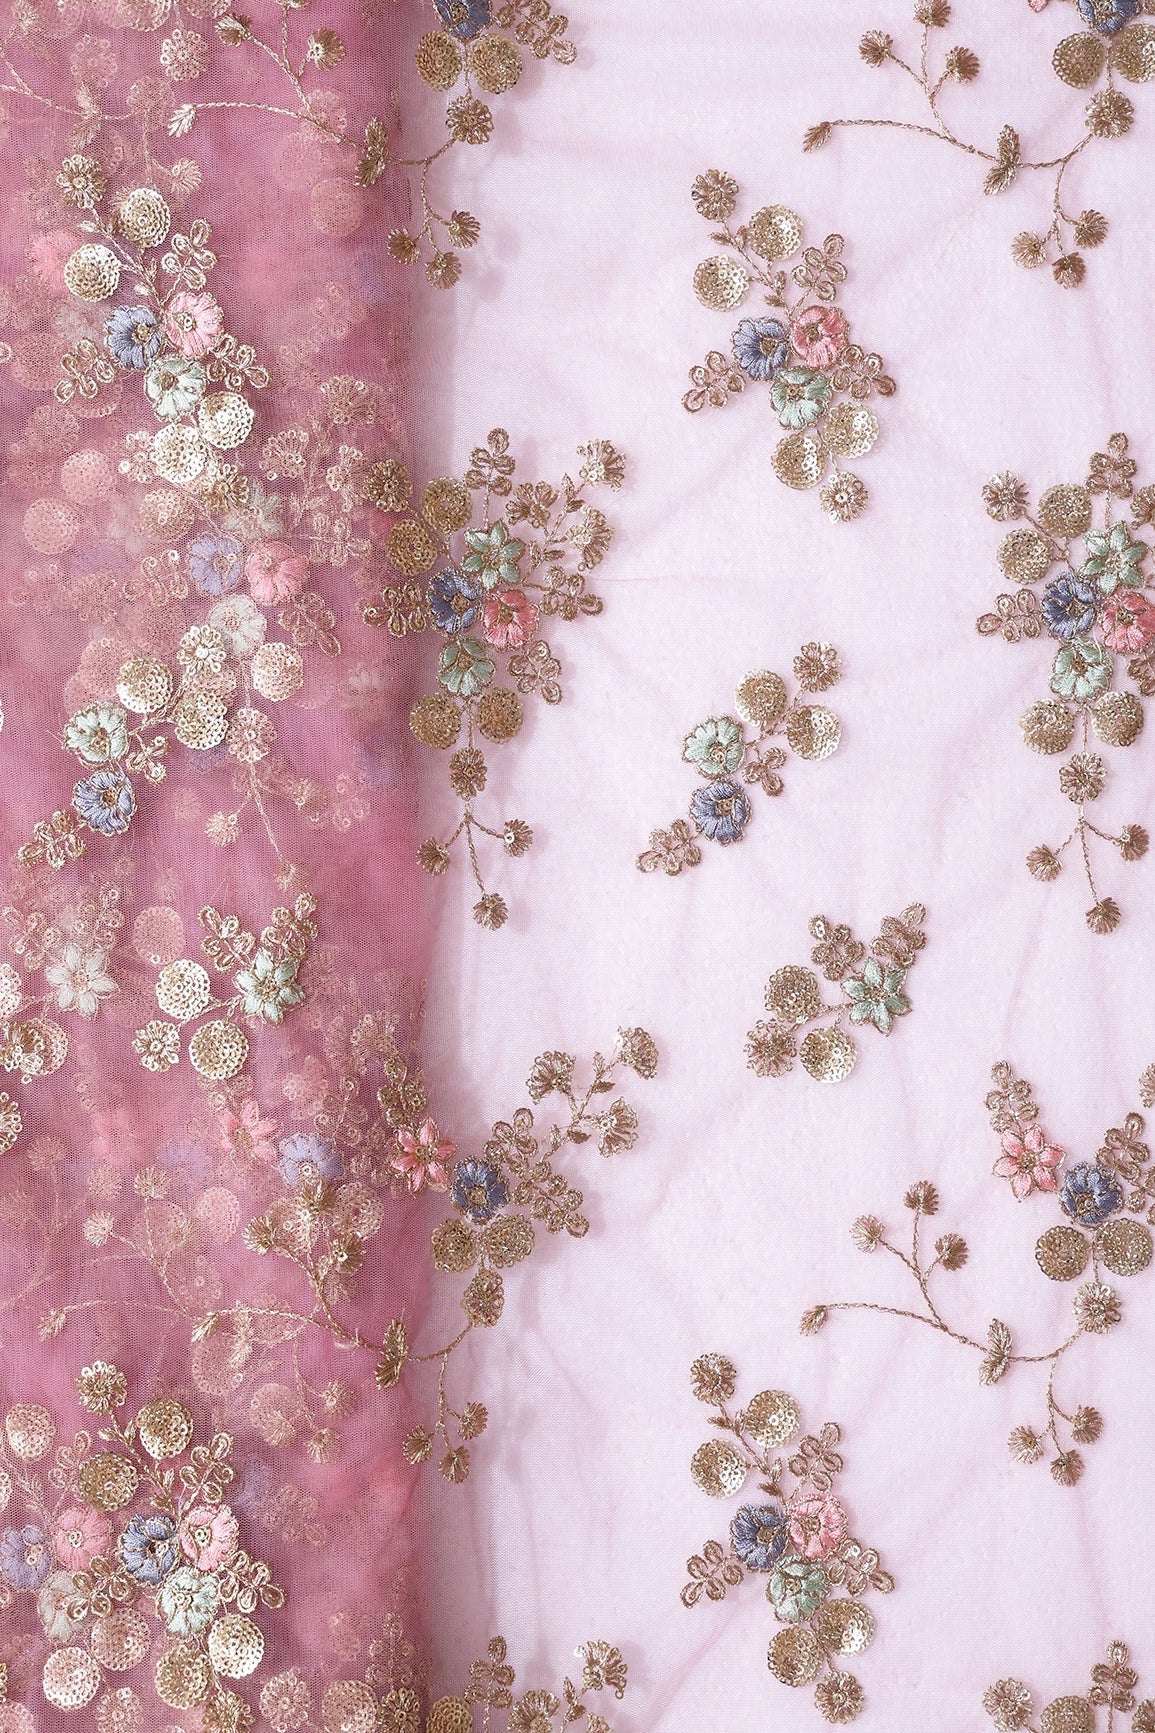 Multi Thread With Gold Sequins Floral Embroidery On Baby Pink Soft Net Fabric - doeraa